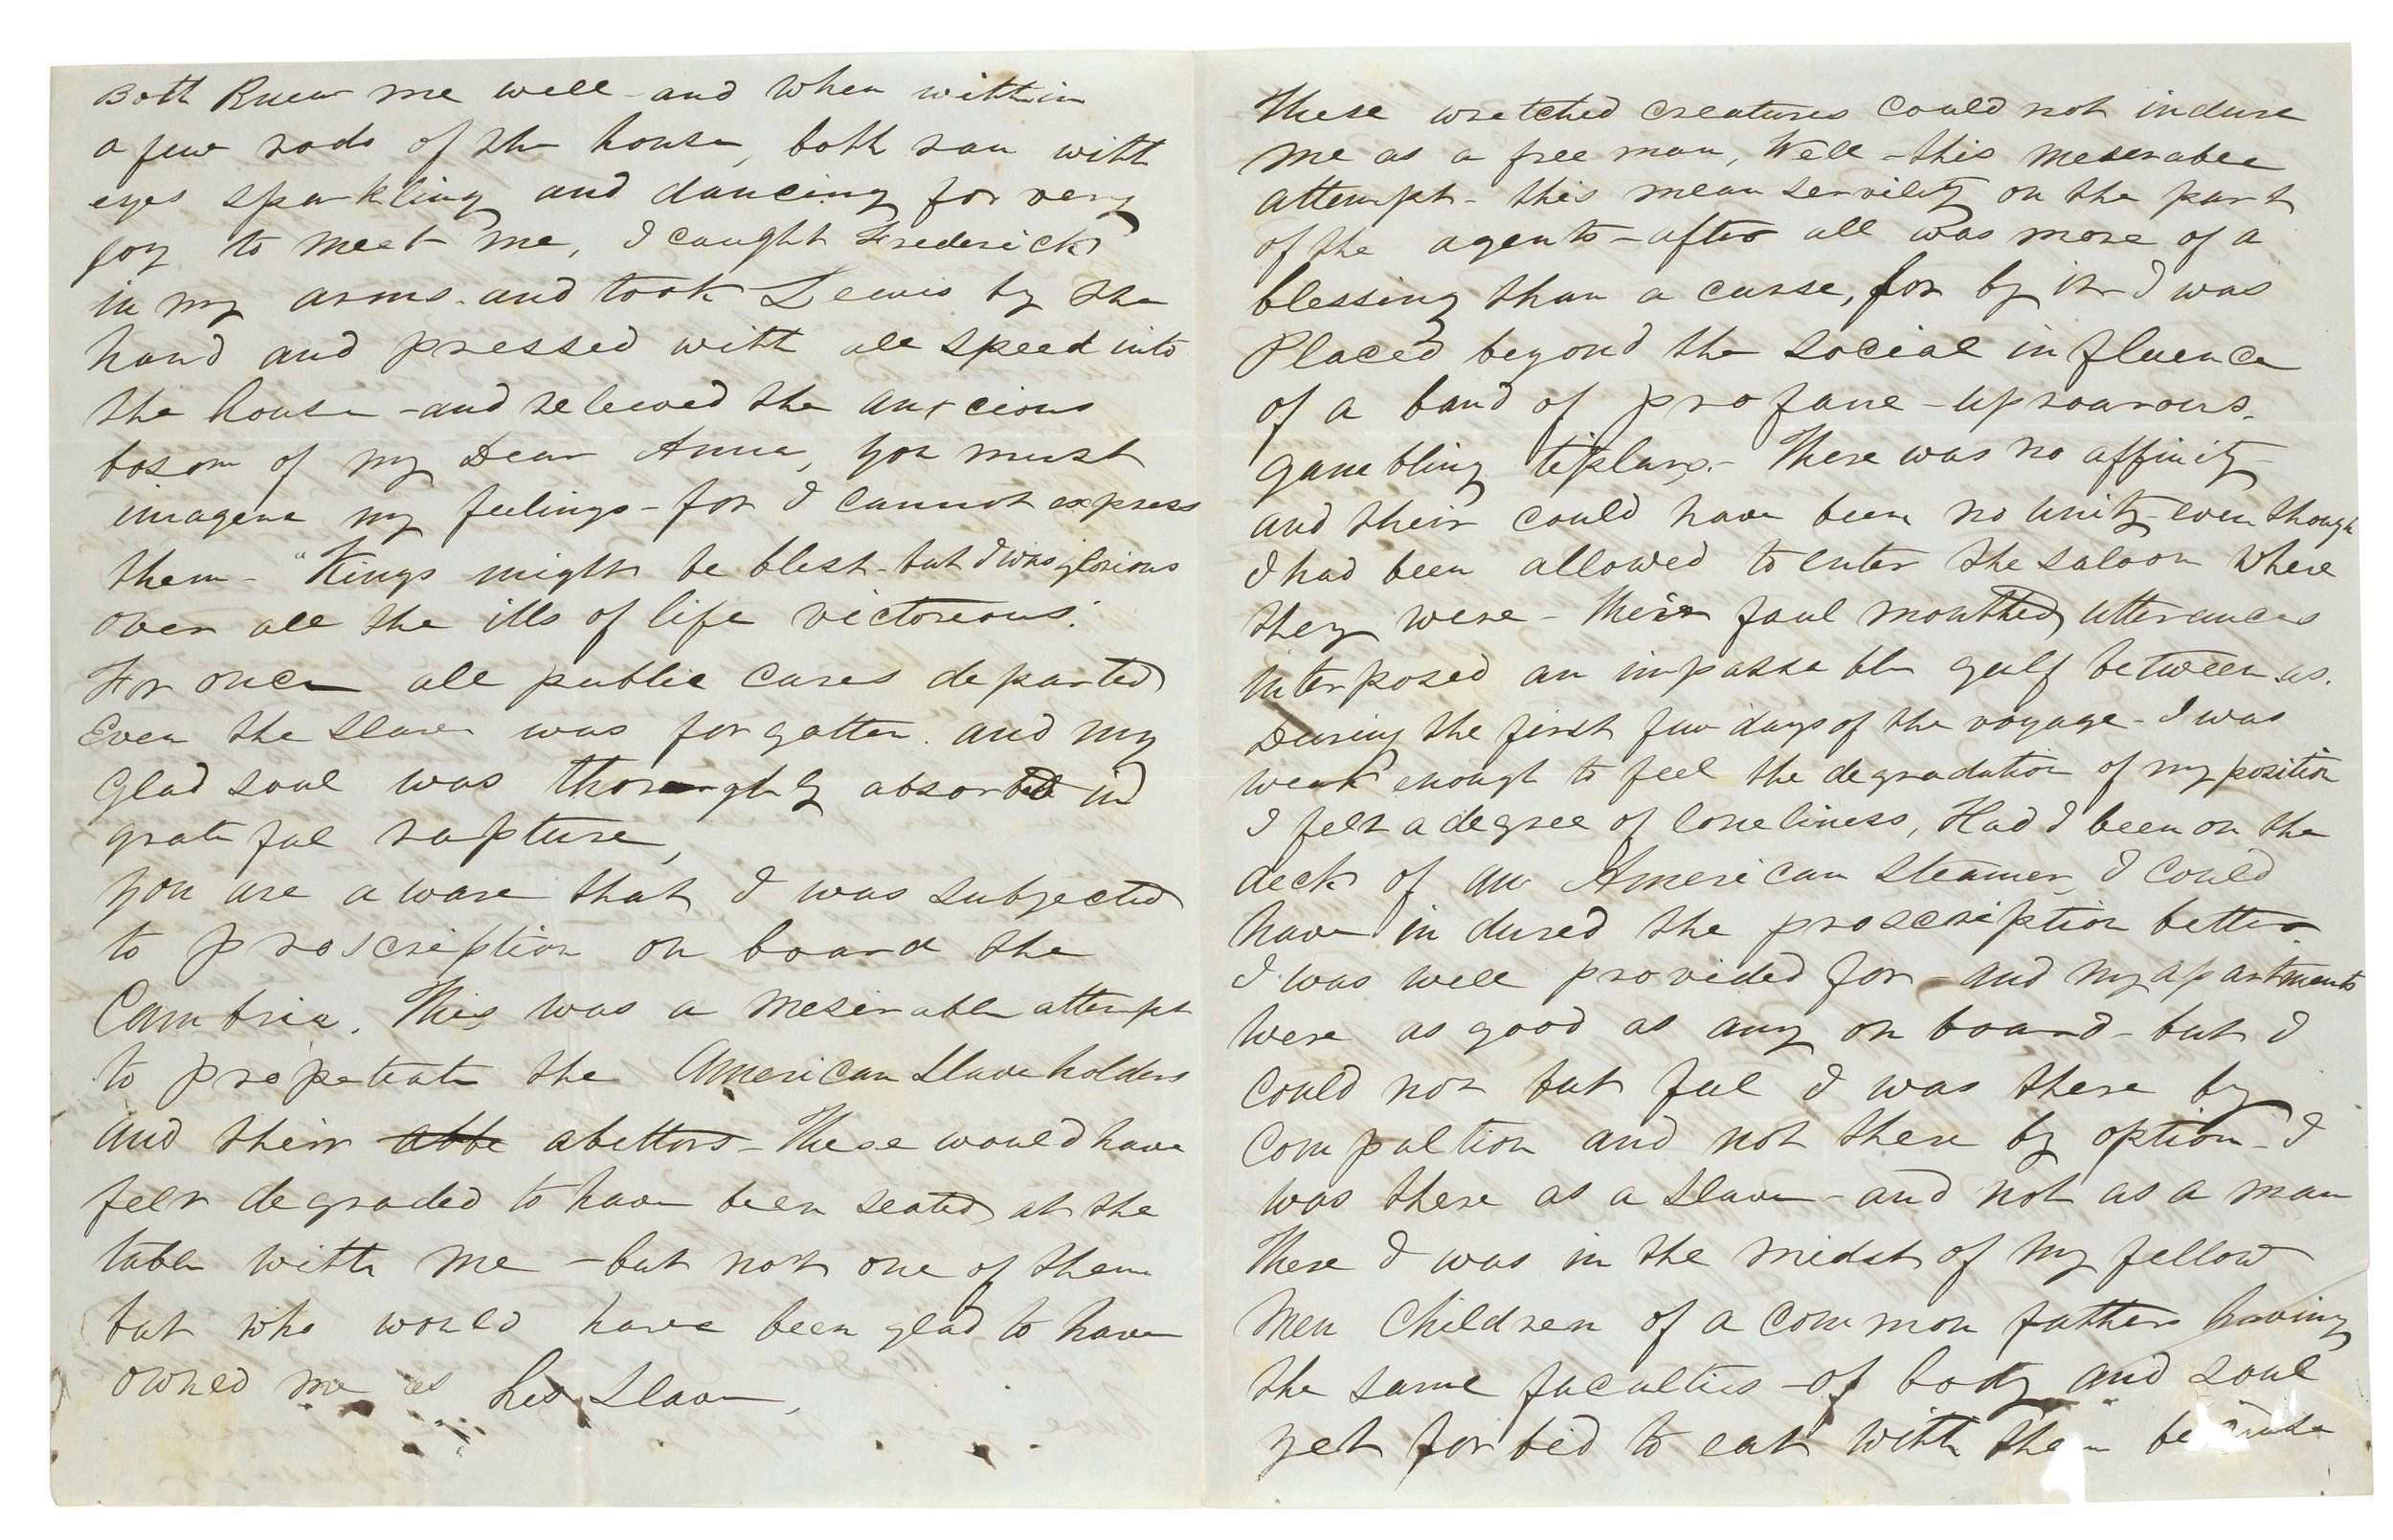  Autograph Letter Signed ("Frederick Douglass") to "Dear Friend" as he returns to America a Free Man, April 29, 1847 